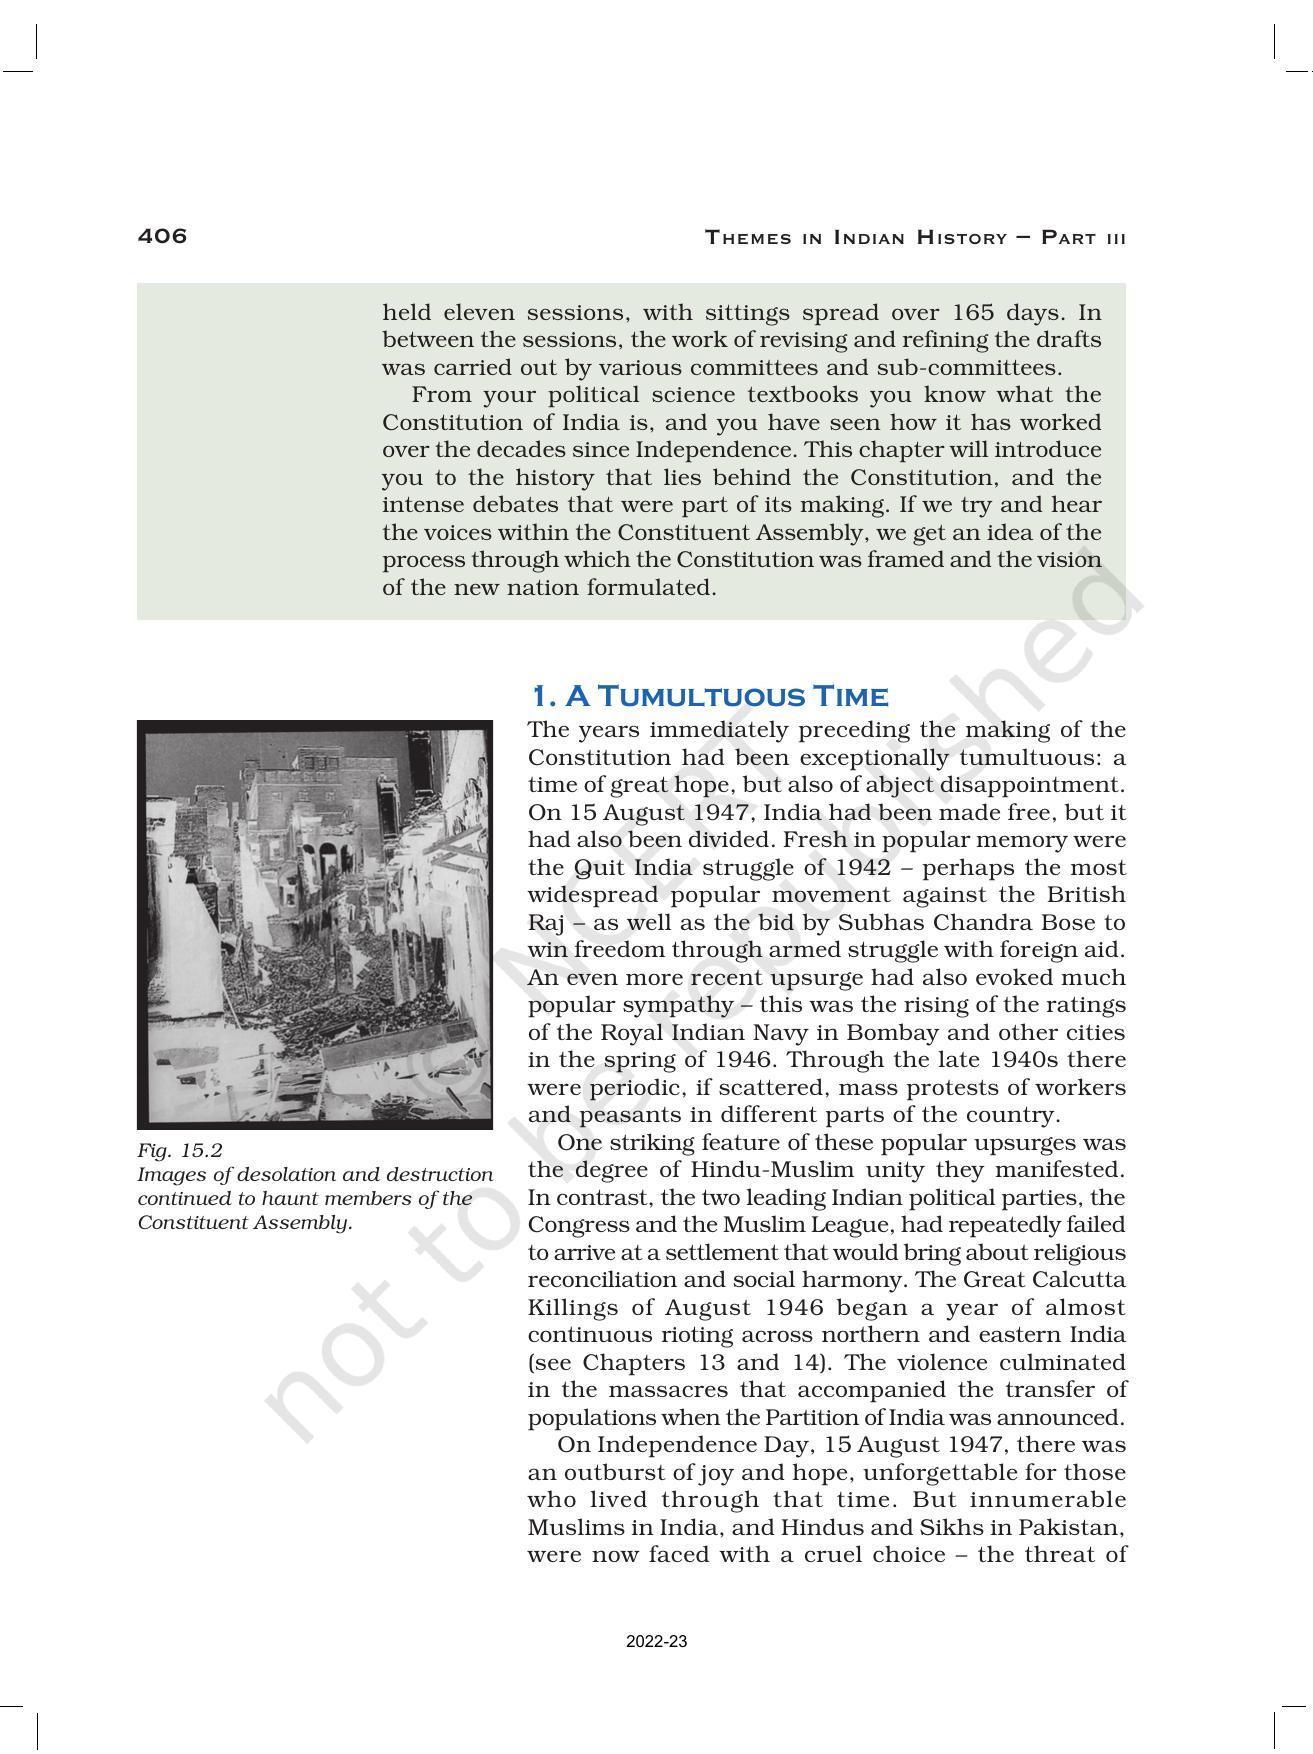 NCERT Book for Class 12 History (Part-III) Chapter 15 Framing and the Constitution - Page 2